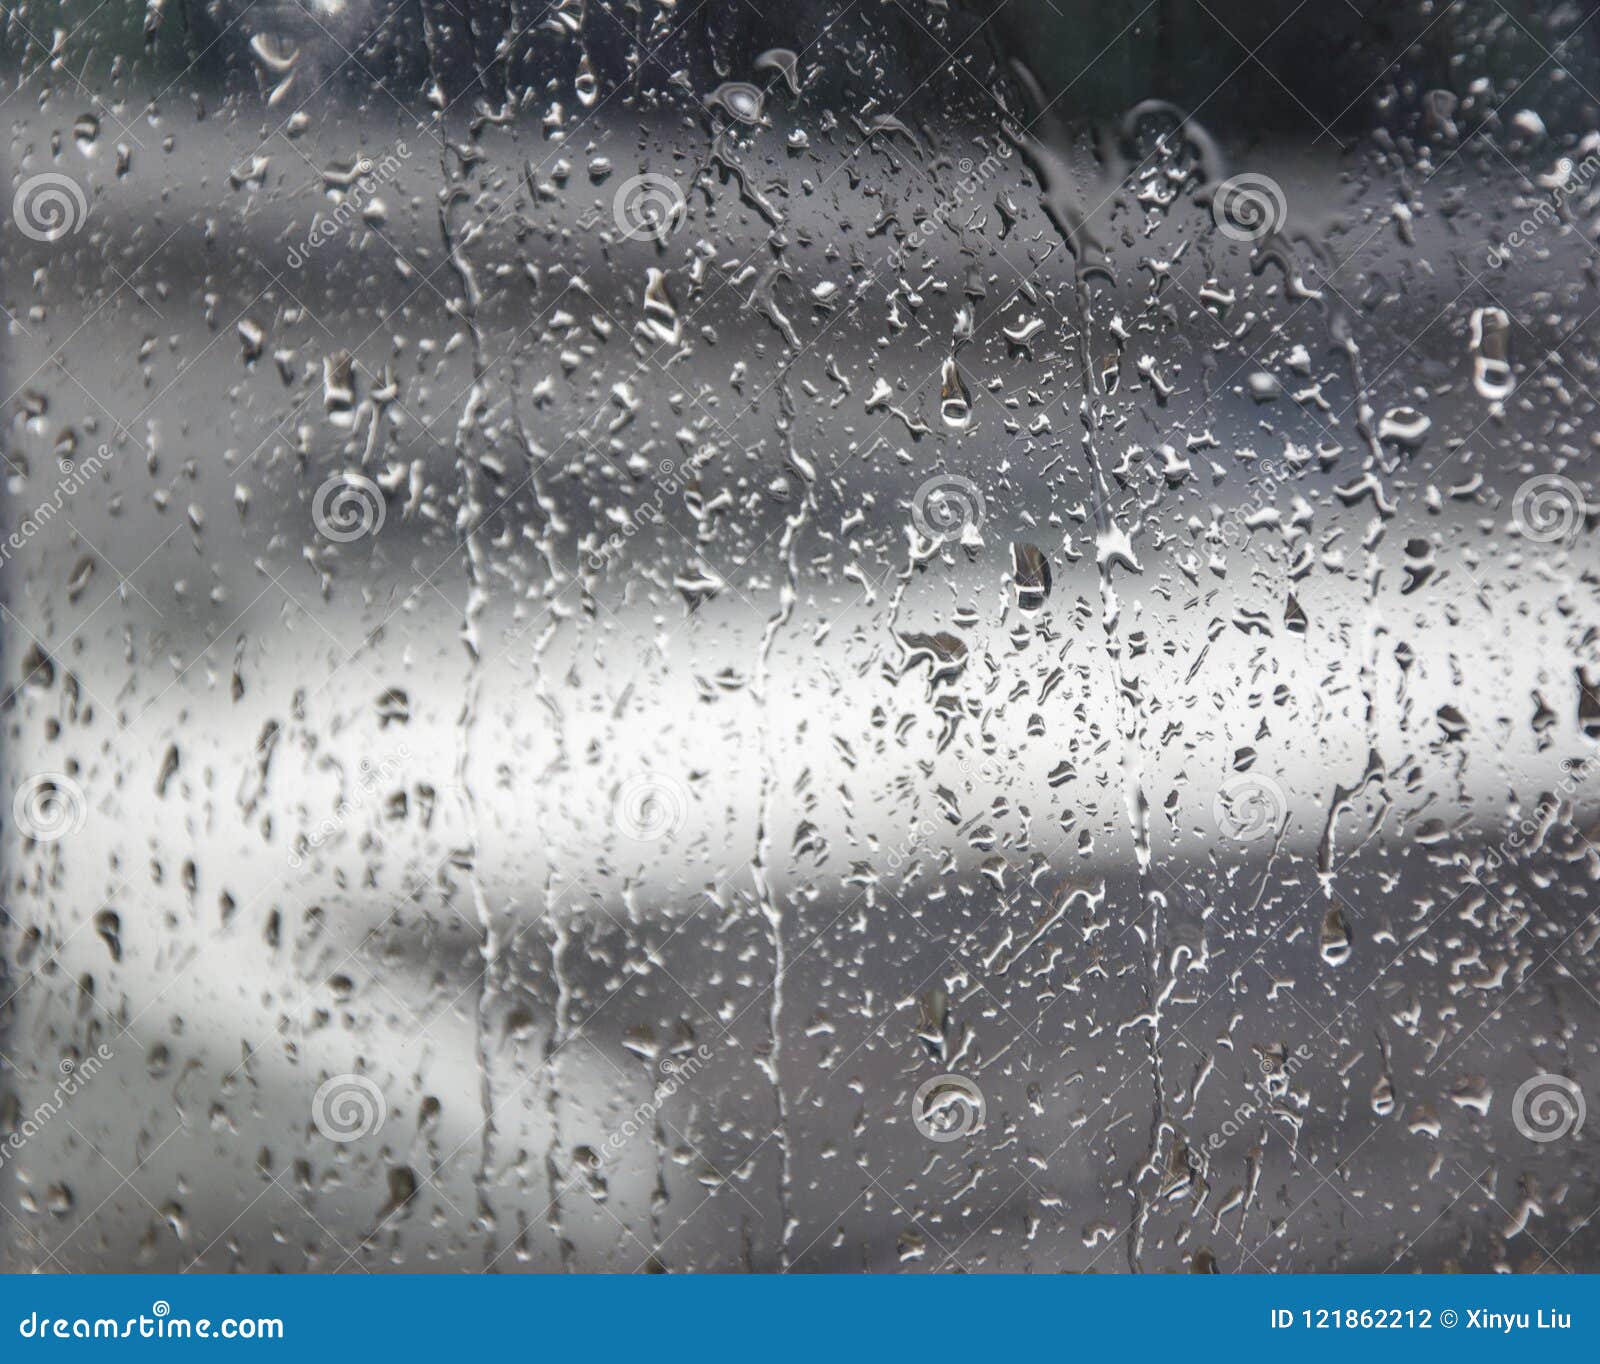 Albums 92+ Images if you see raindrops splashing on the surface of the road Completed